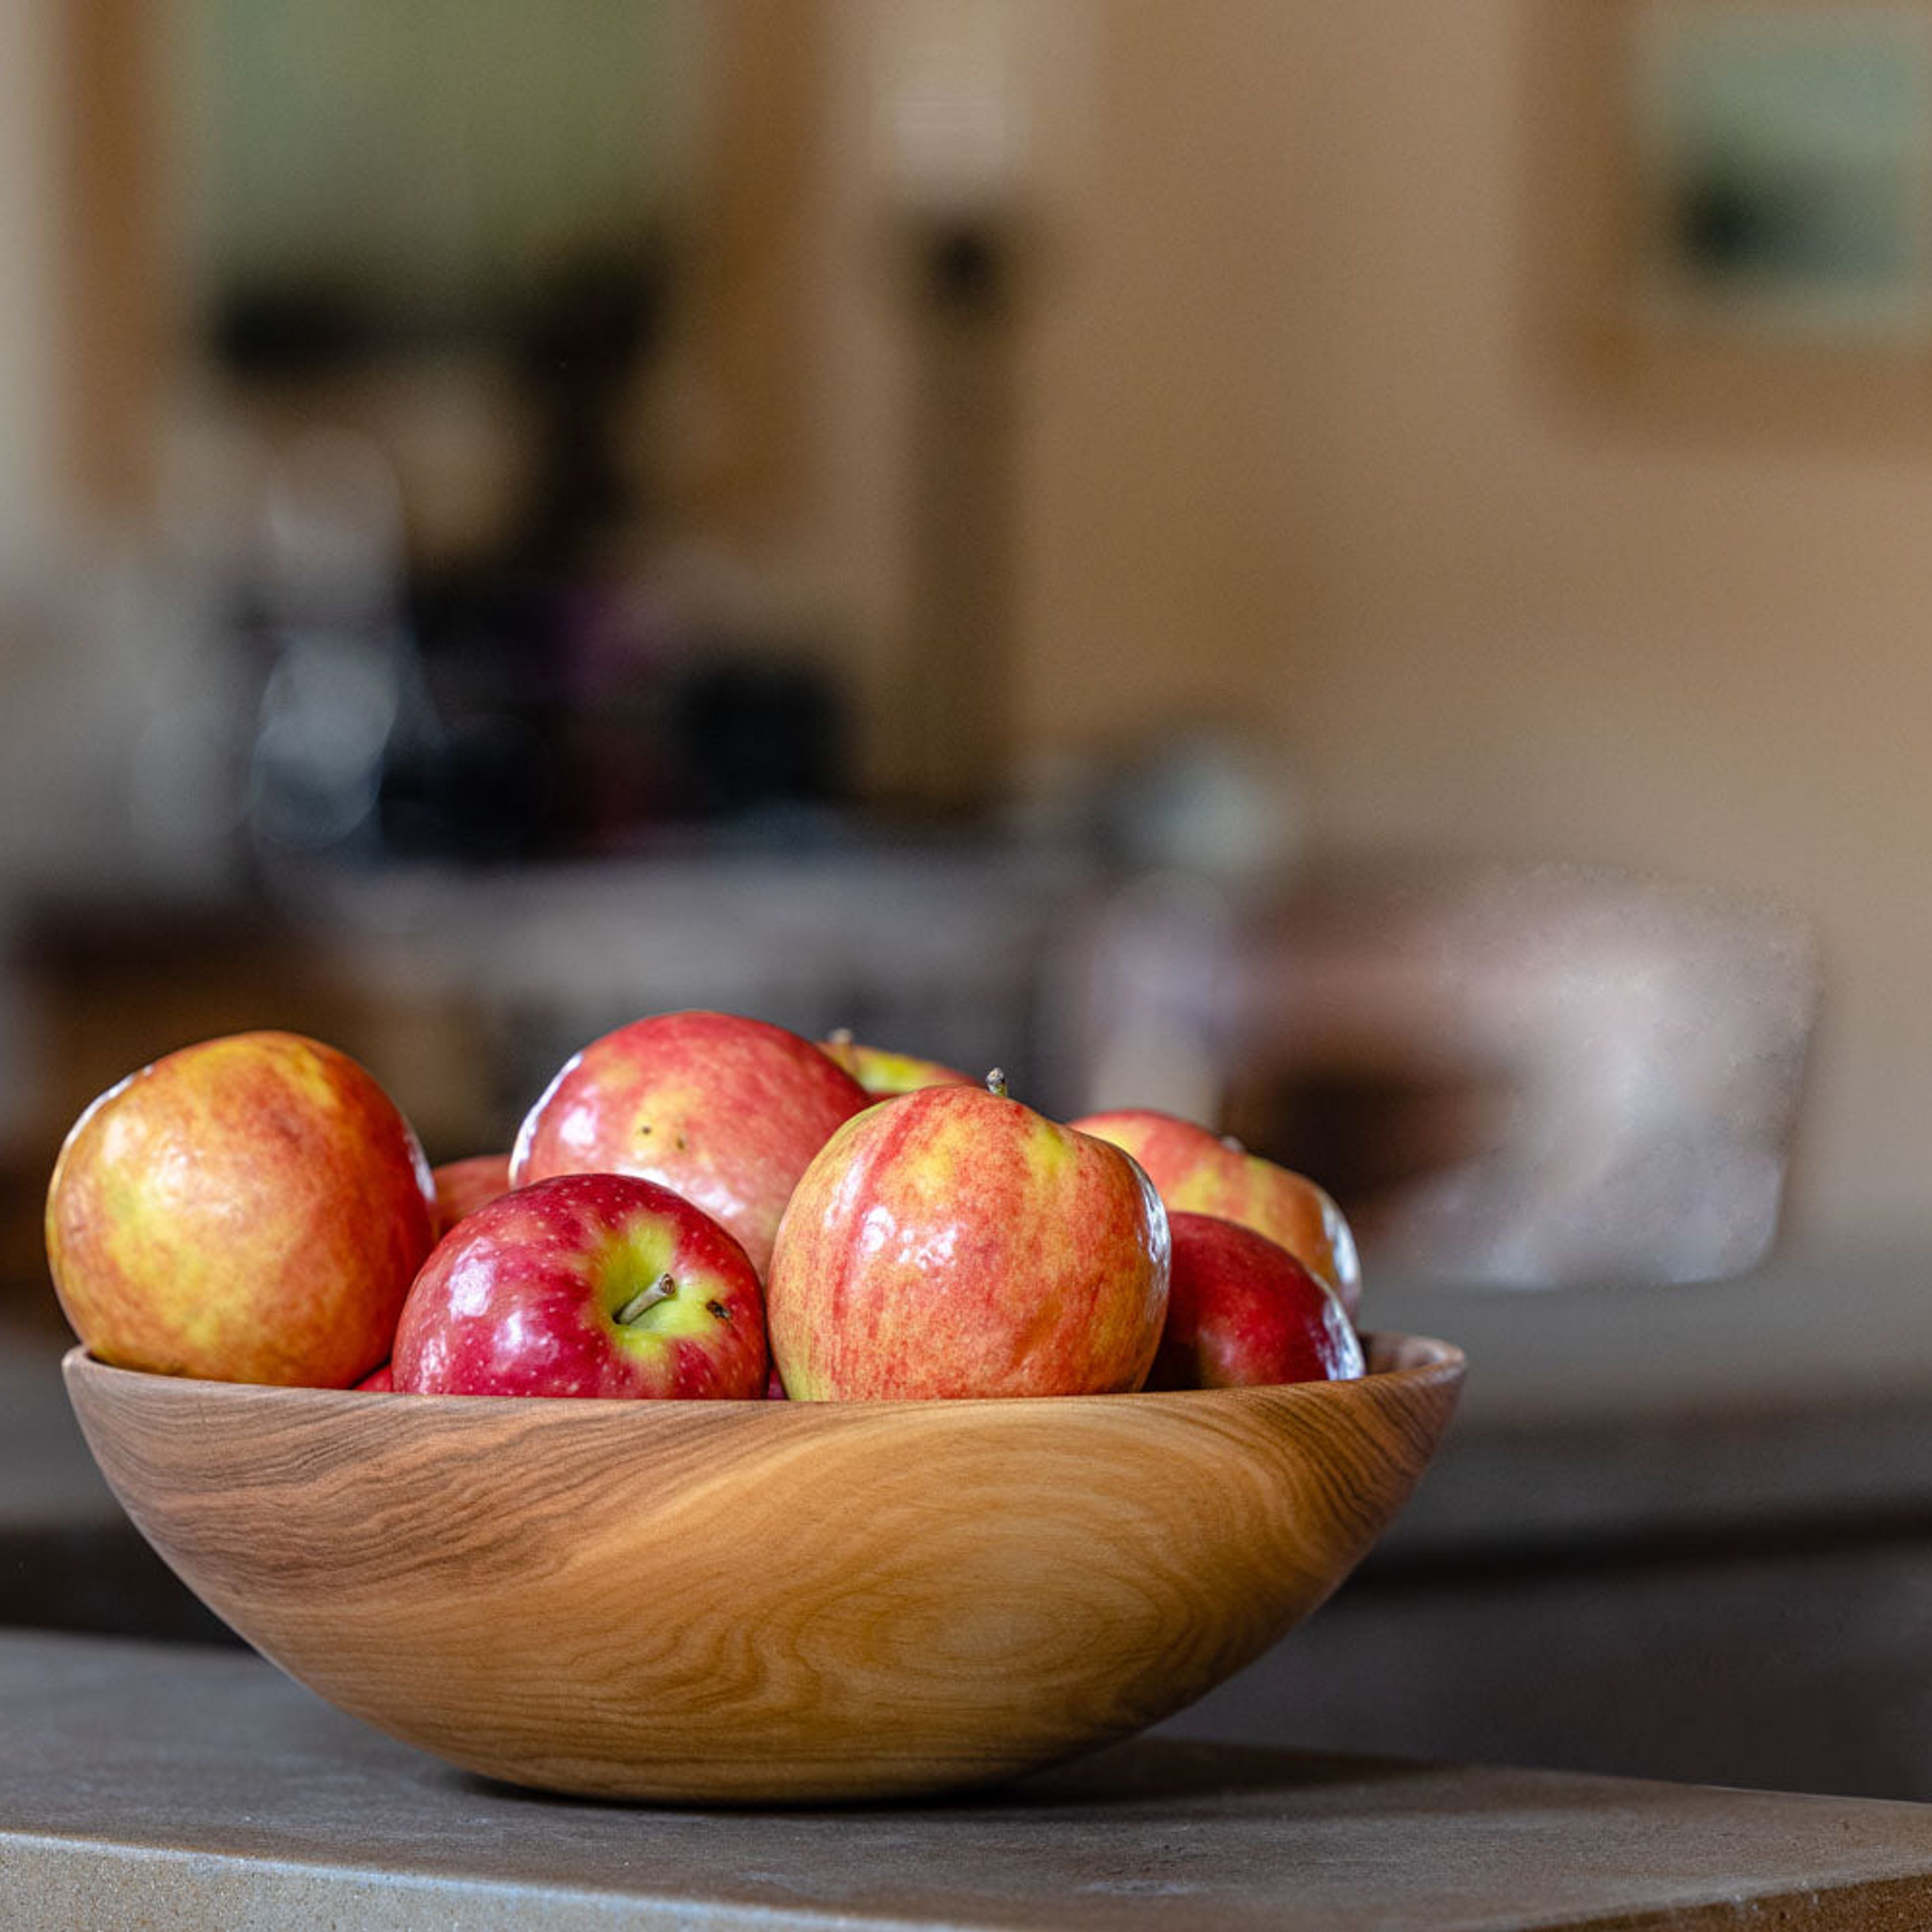 11 Inch Wooden Bowl Set - With 6 Inch Bowls